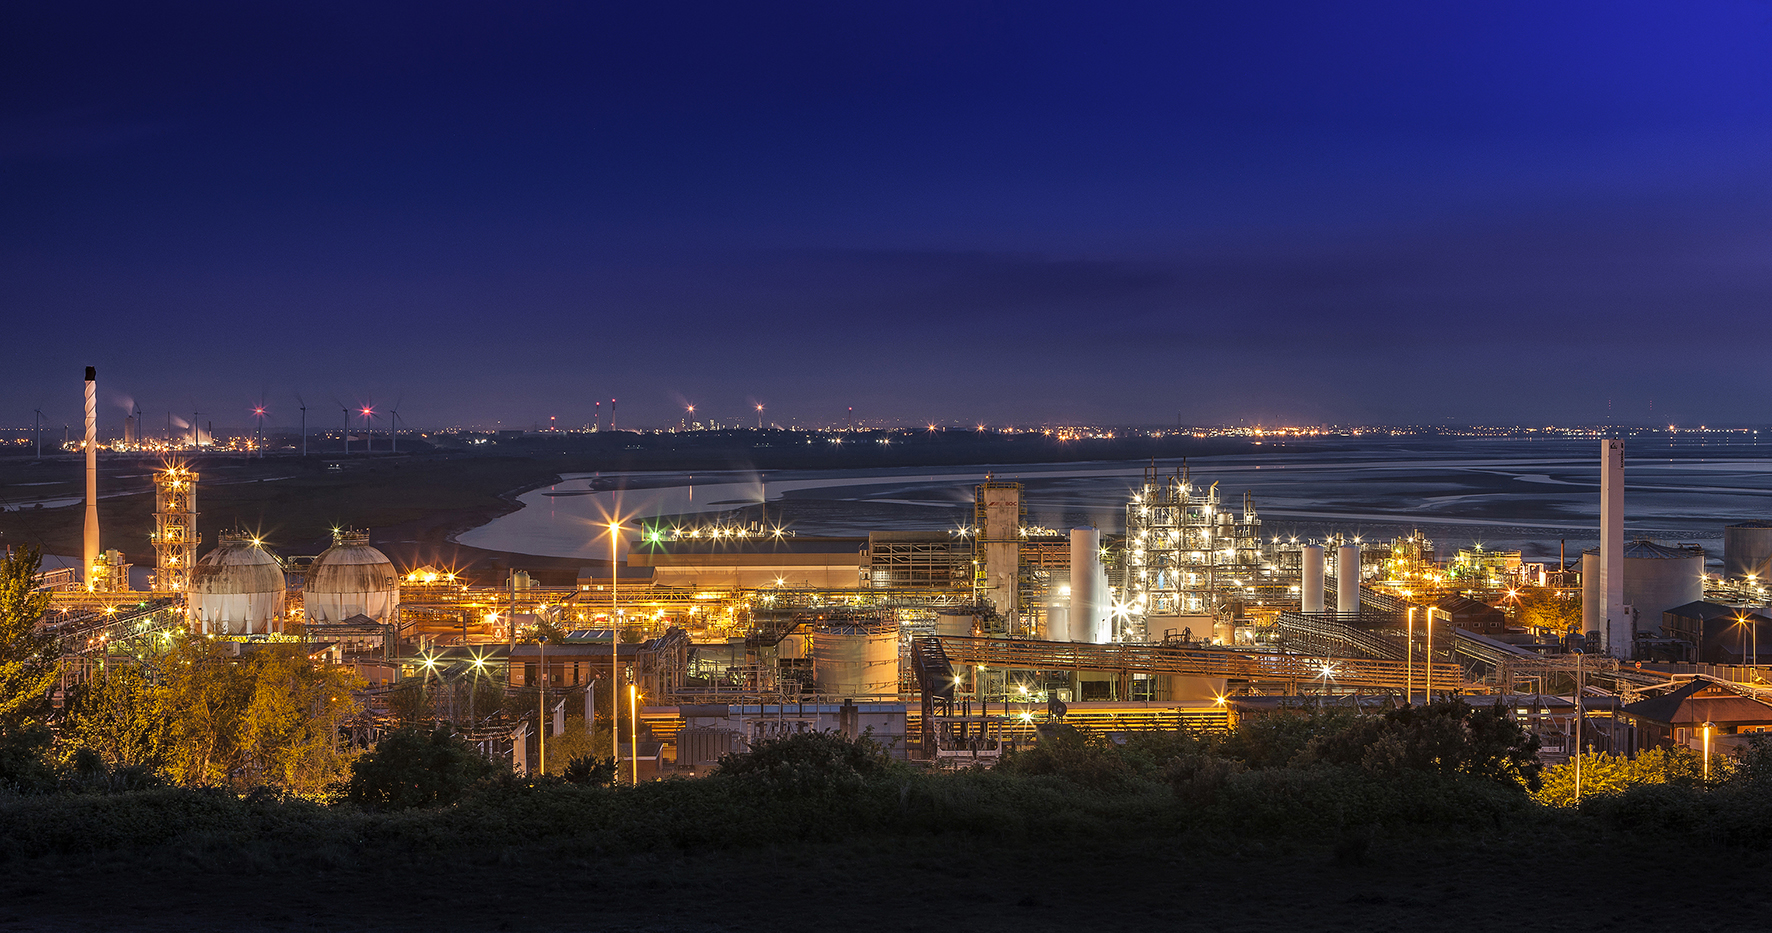 view over Stanlow refinery at night with canal and Ellesmere Port in distance